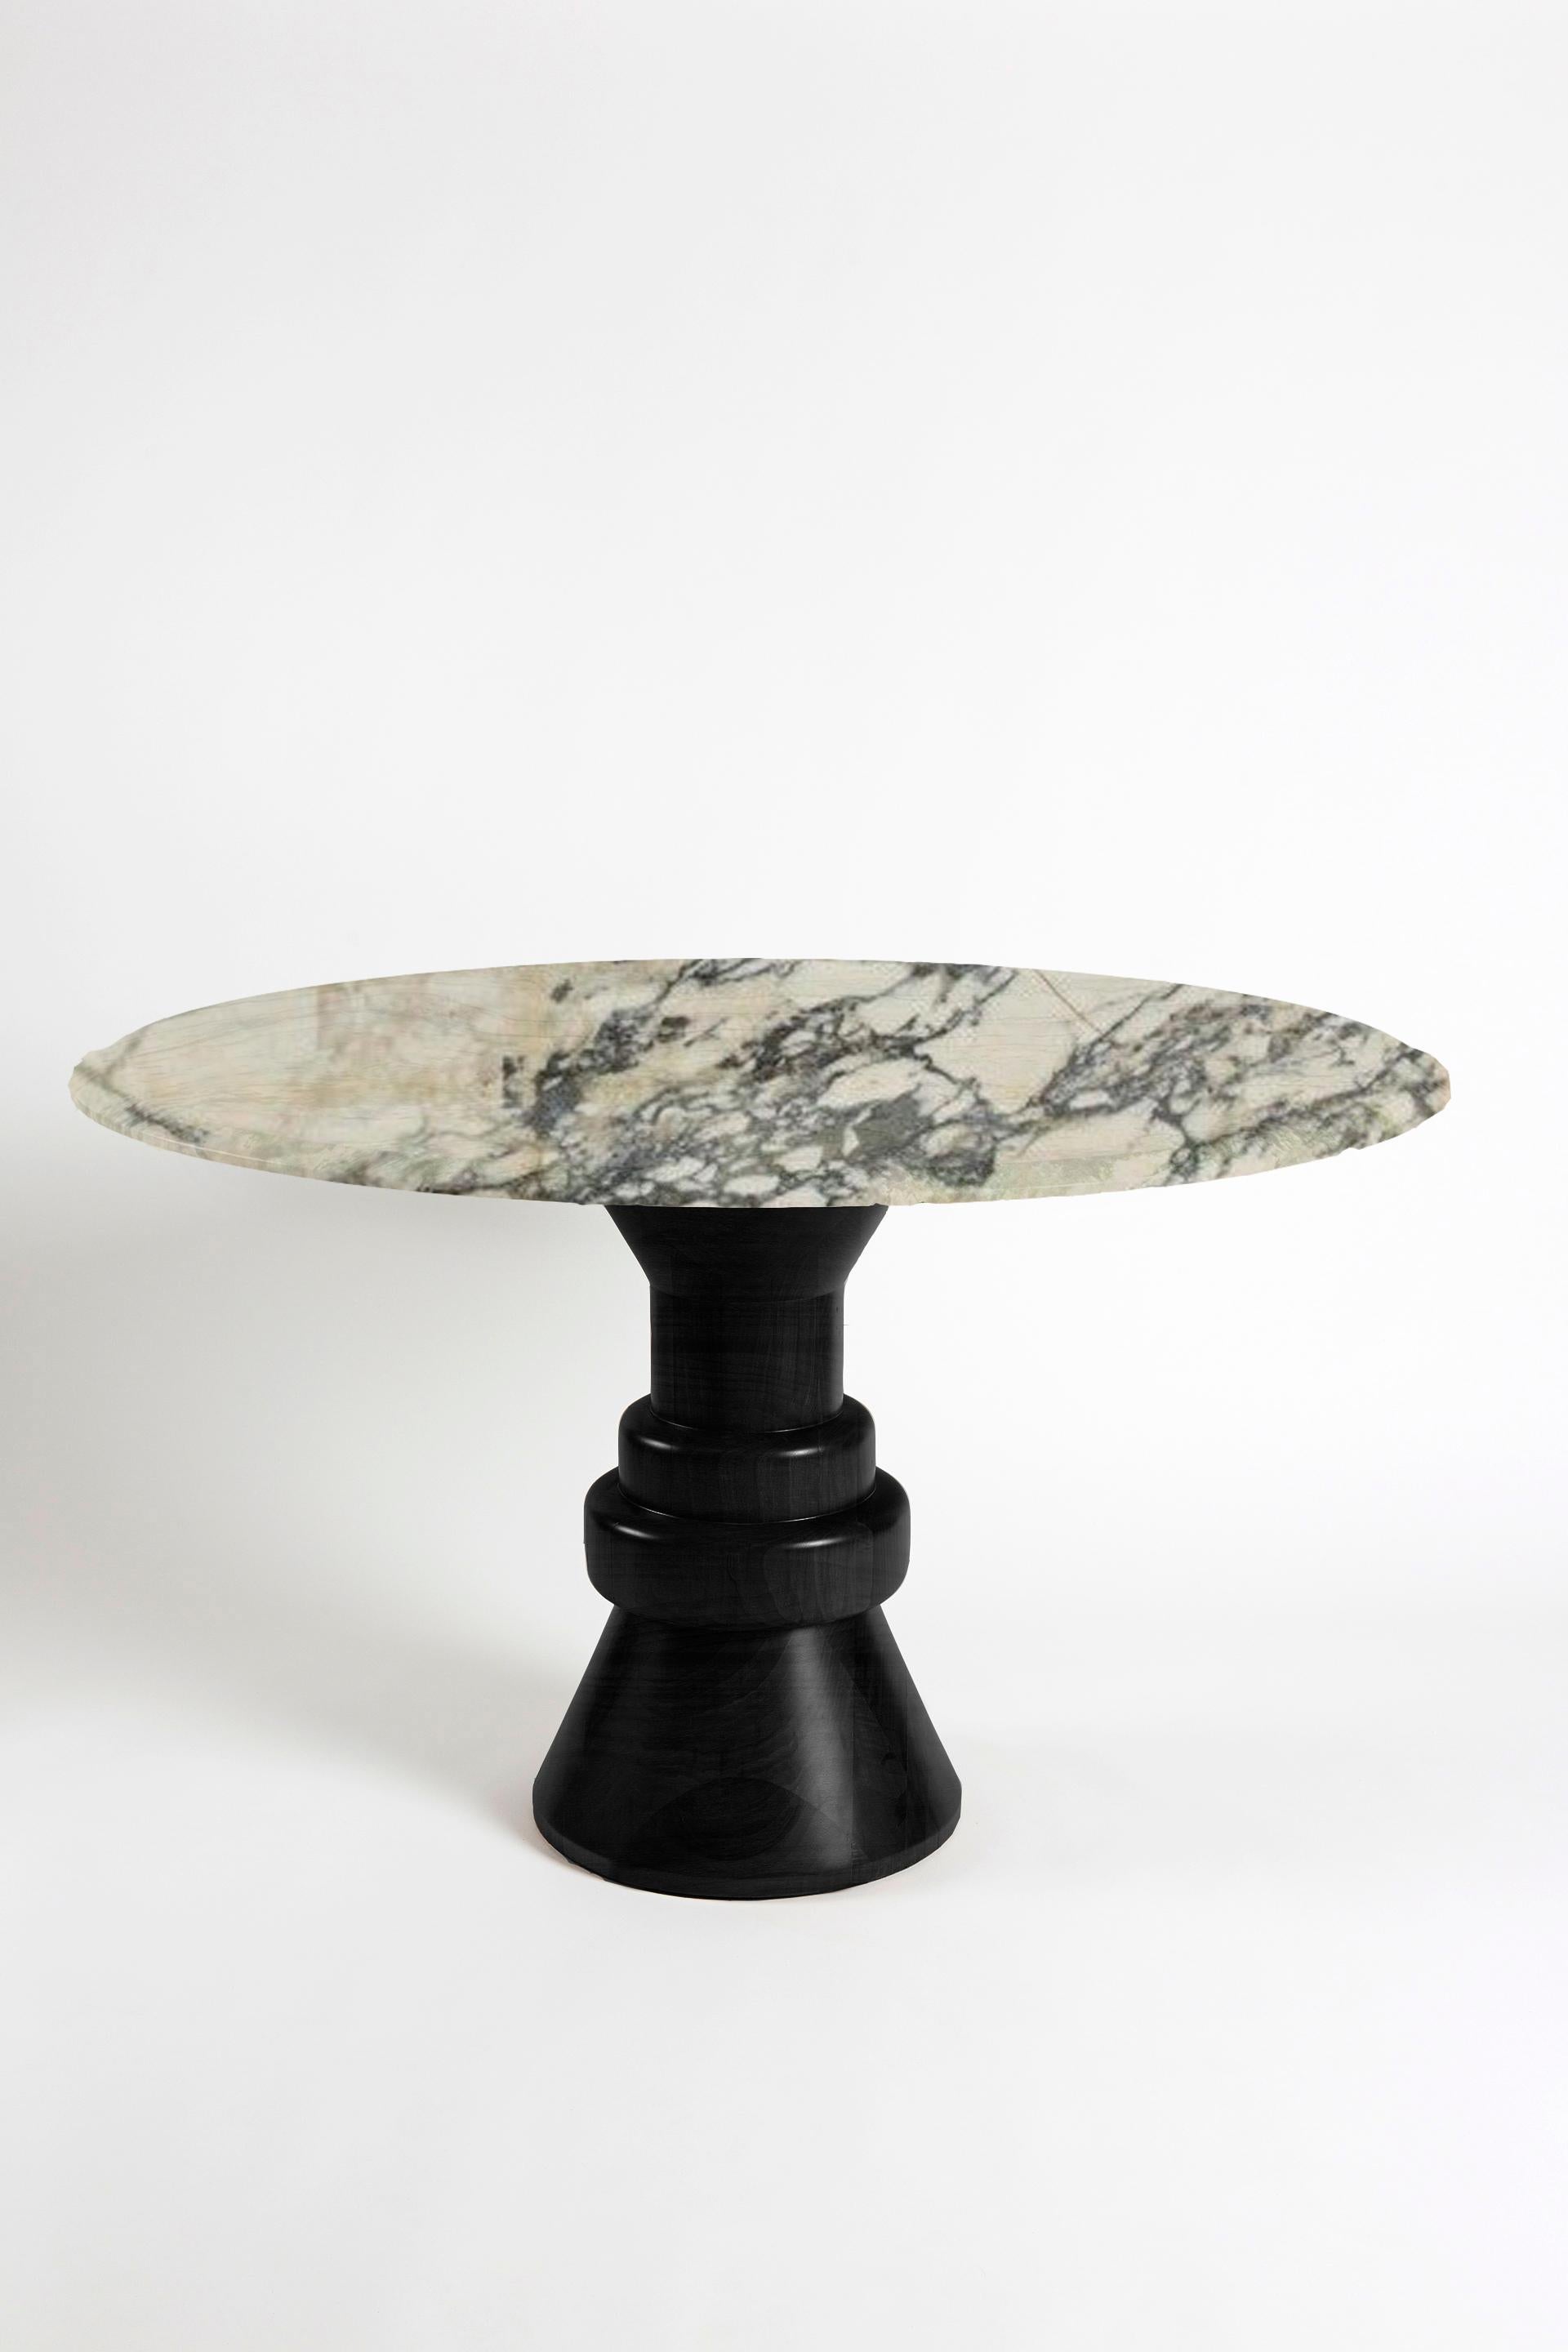 21st Century Cream Marble Round Dining Table with Sculptural Wooden Base For Sale 1